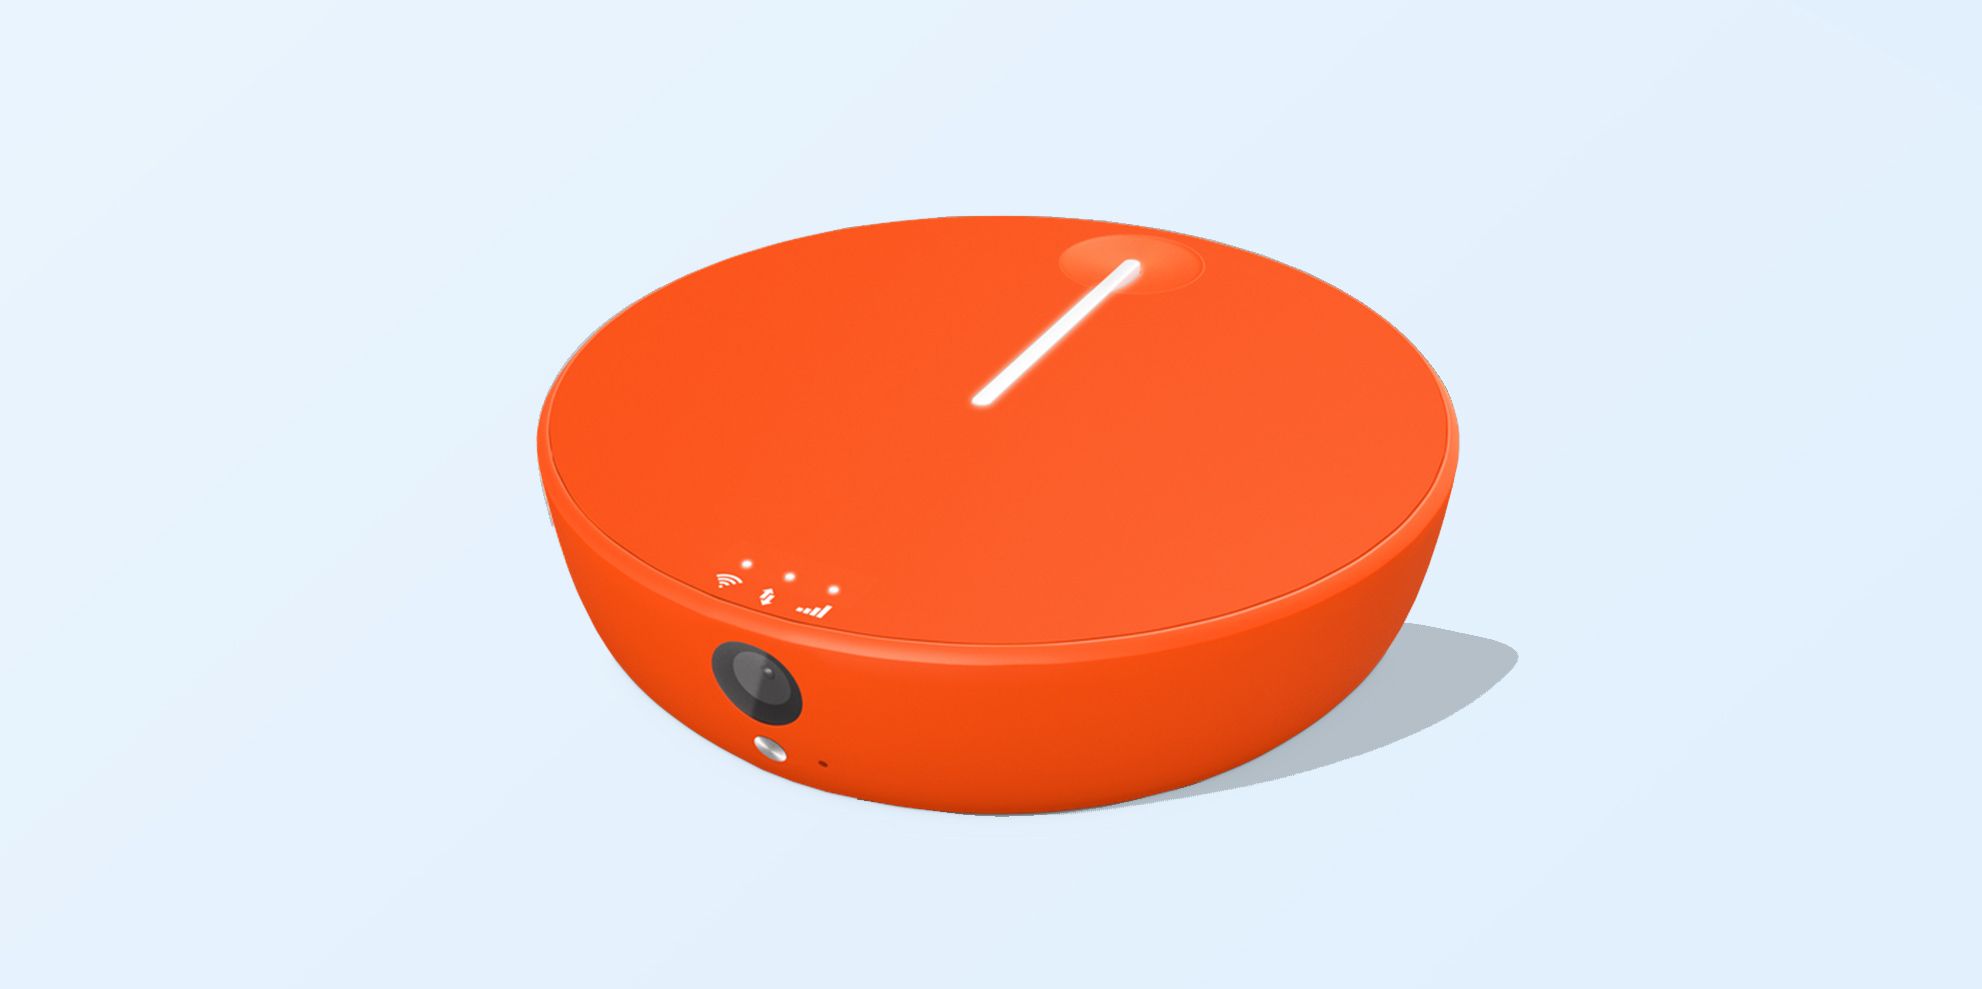 Buy Portable WiFi Hotspots, IoT & Connected Devices